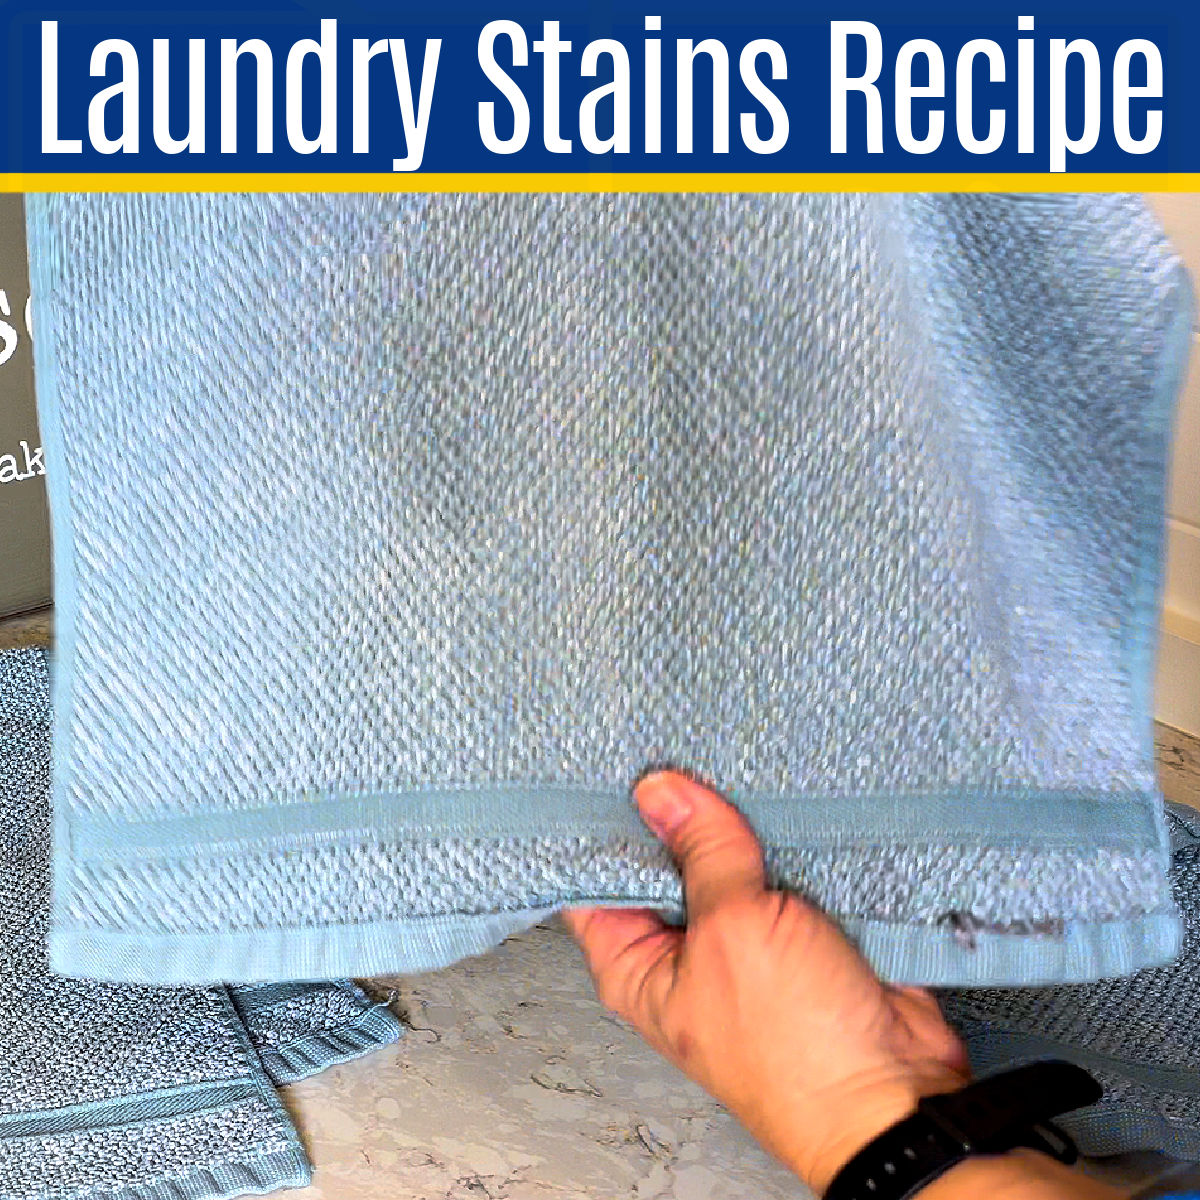 Testing 3 Ways To Remove Old Laundry Stains After Drying (1 Worked Best ...